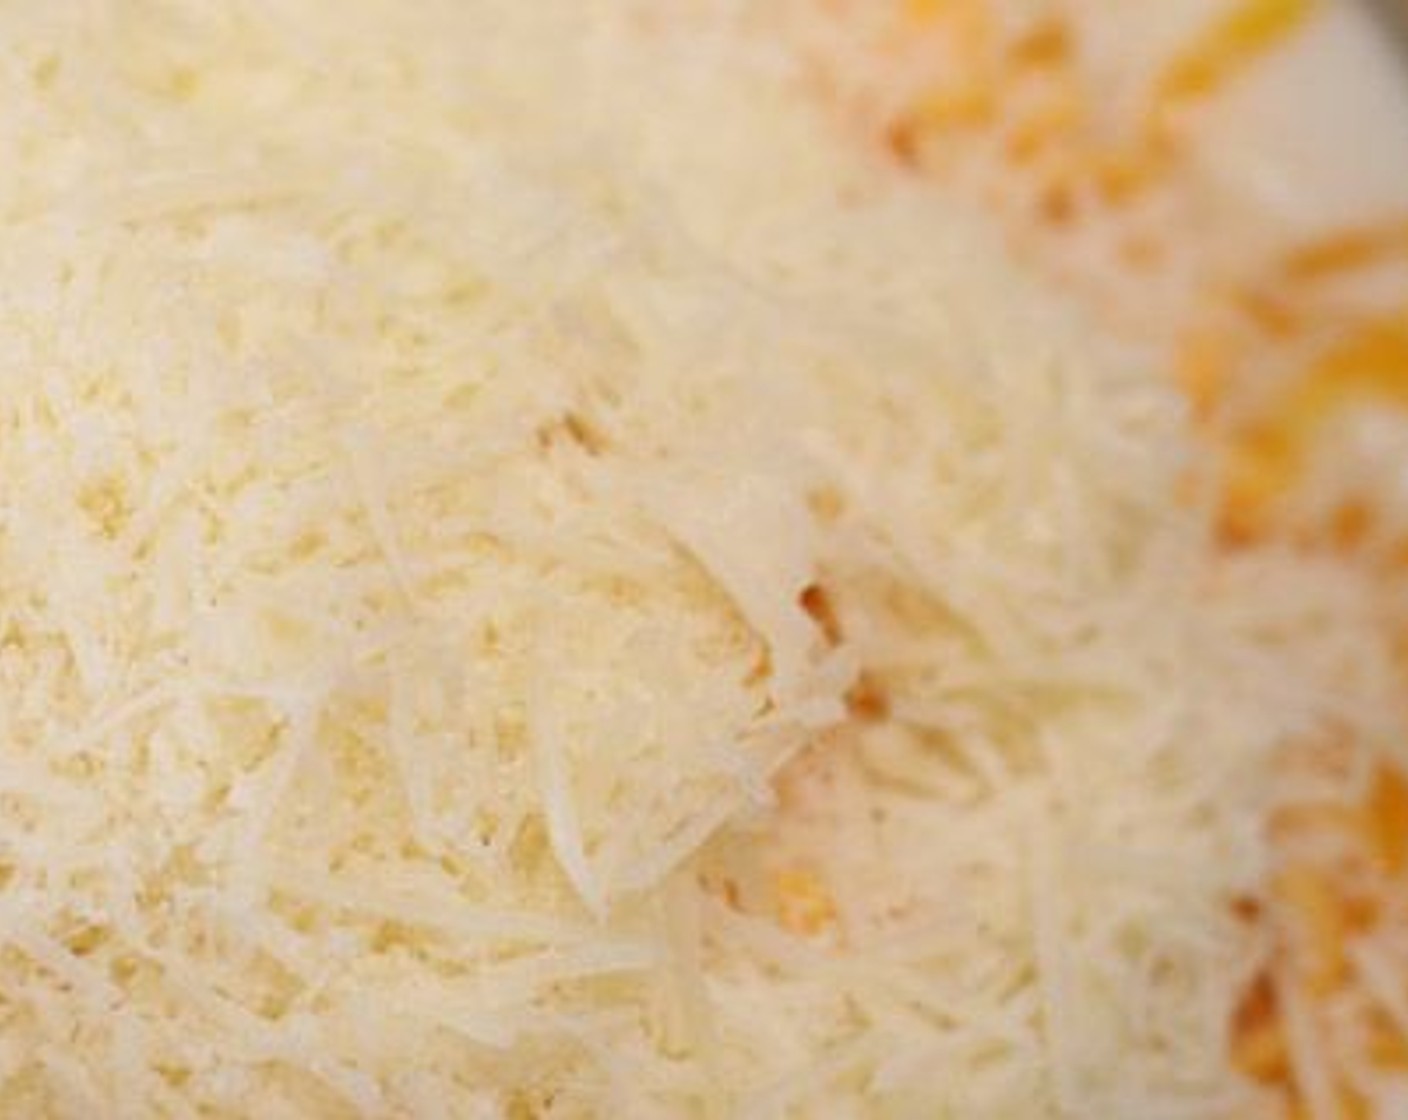 step 4 Remove from the stove and stir in the Shredded Sharp Cheddar Cheese (2 cups), Monterey Jack Cheese (1 cup), and Sour Cream (1 cup), stir until melted and blended. Add the Frozen Shredded Hash Browns (1 bag) and stir until evenly mixed.